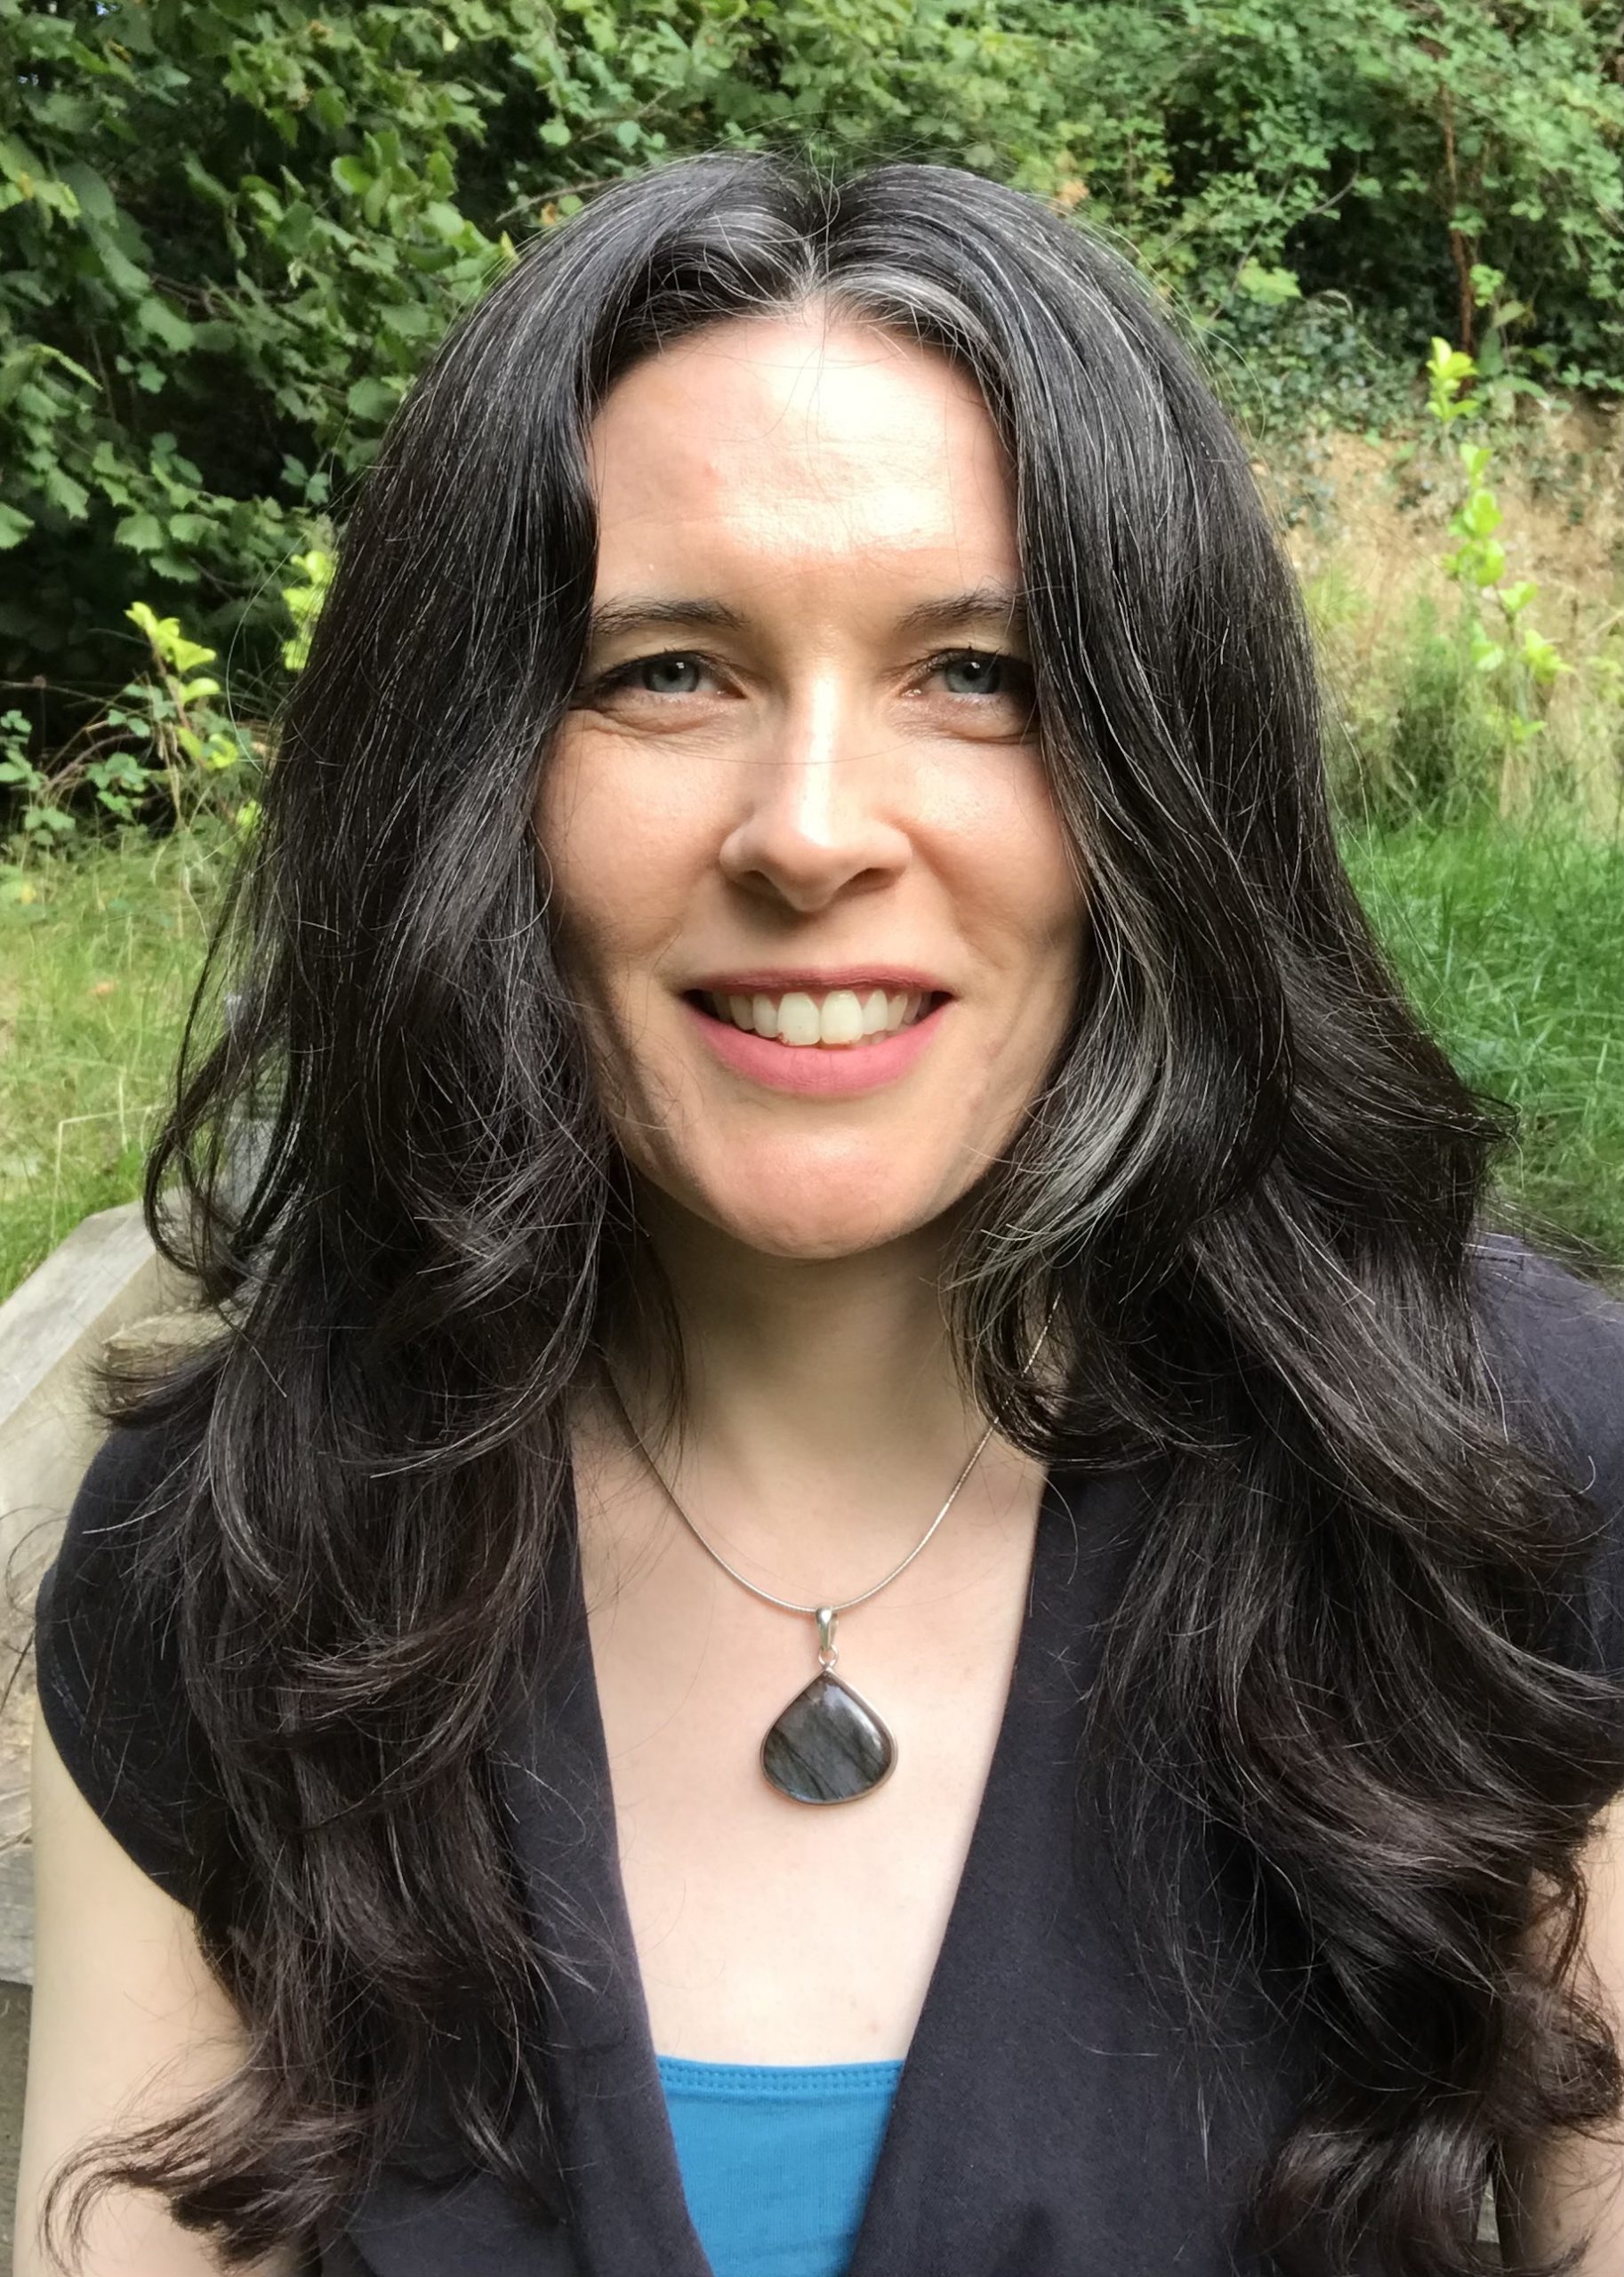 Headshot of Jacqui McGinn who has long, wavy, dark hair and white skin. She's outside with greenery behind her and wearing a labradorite crystal around her neck.